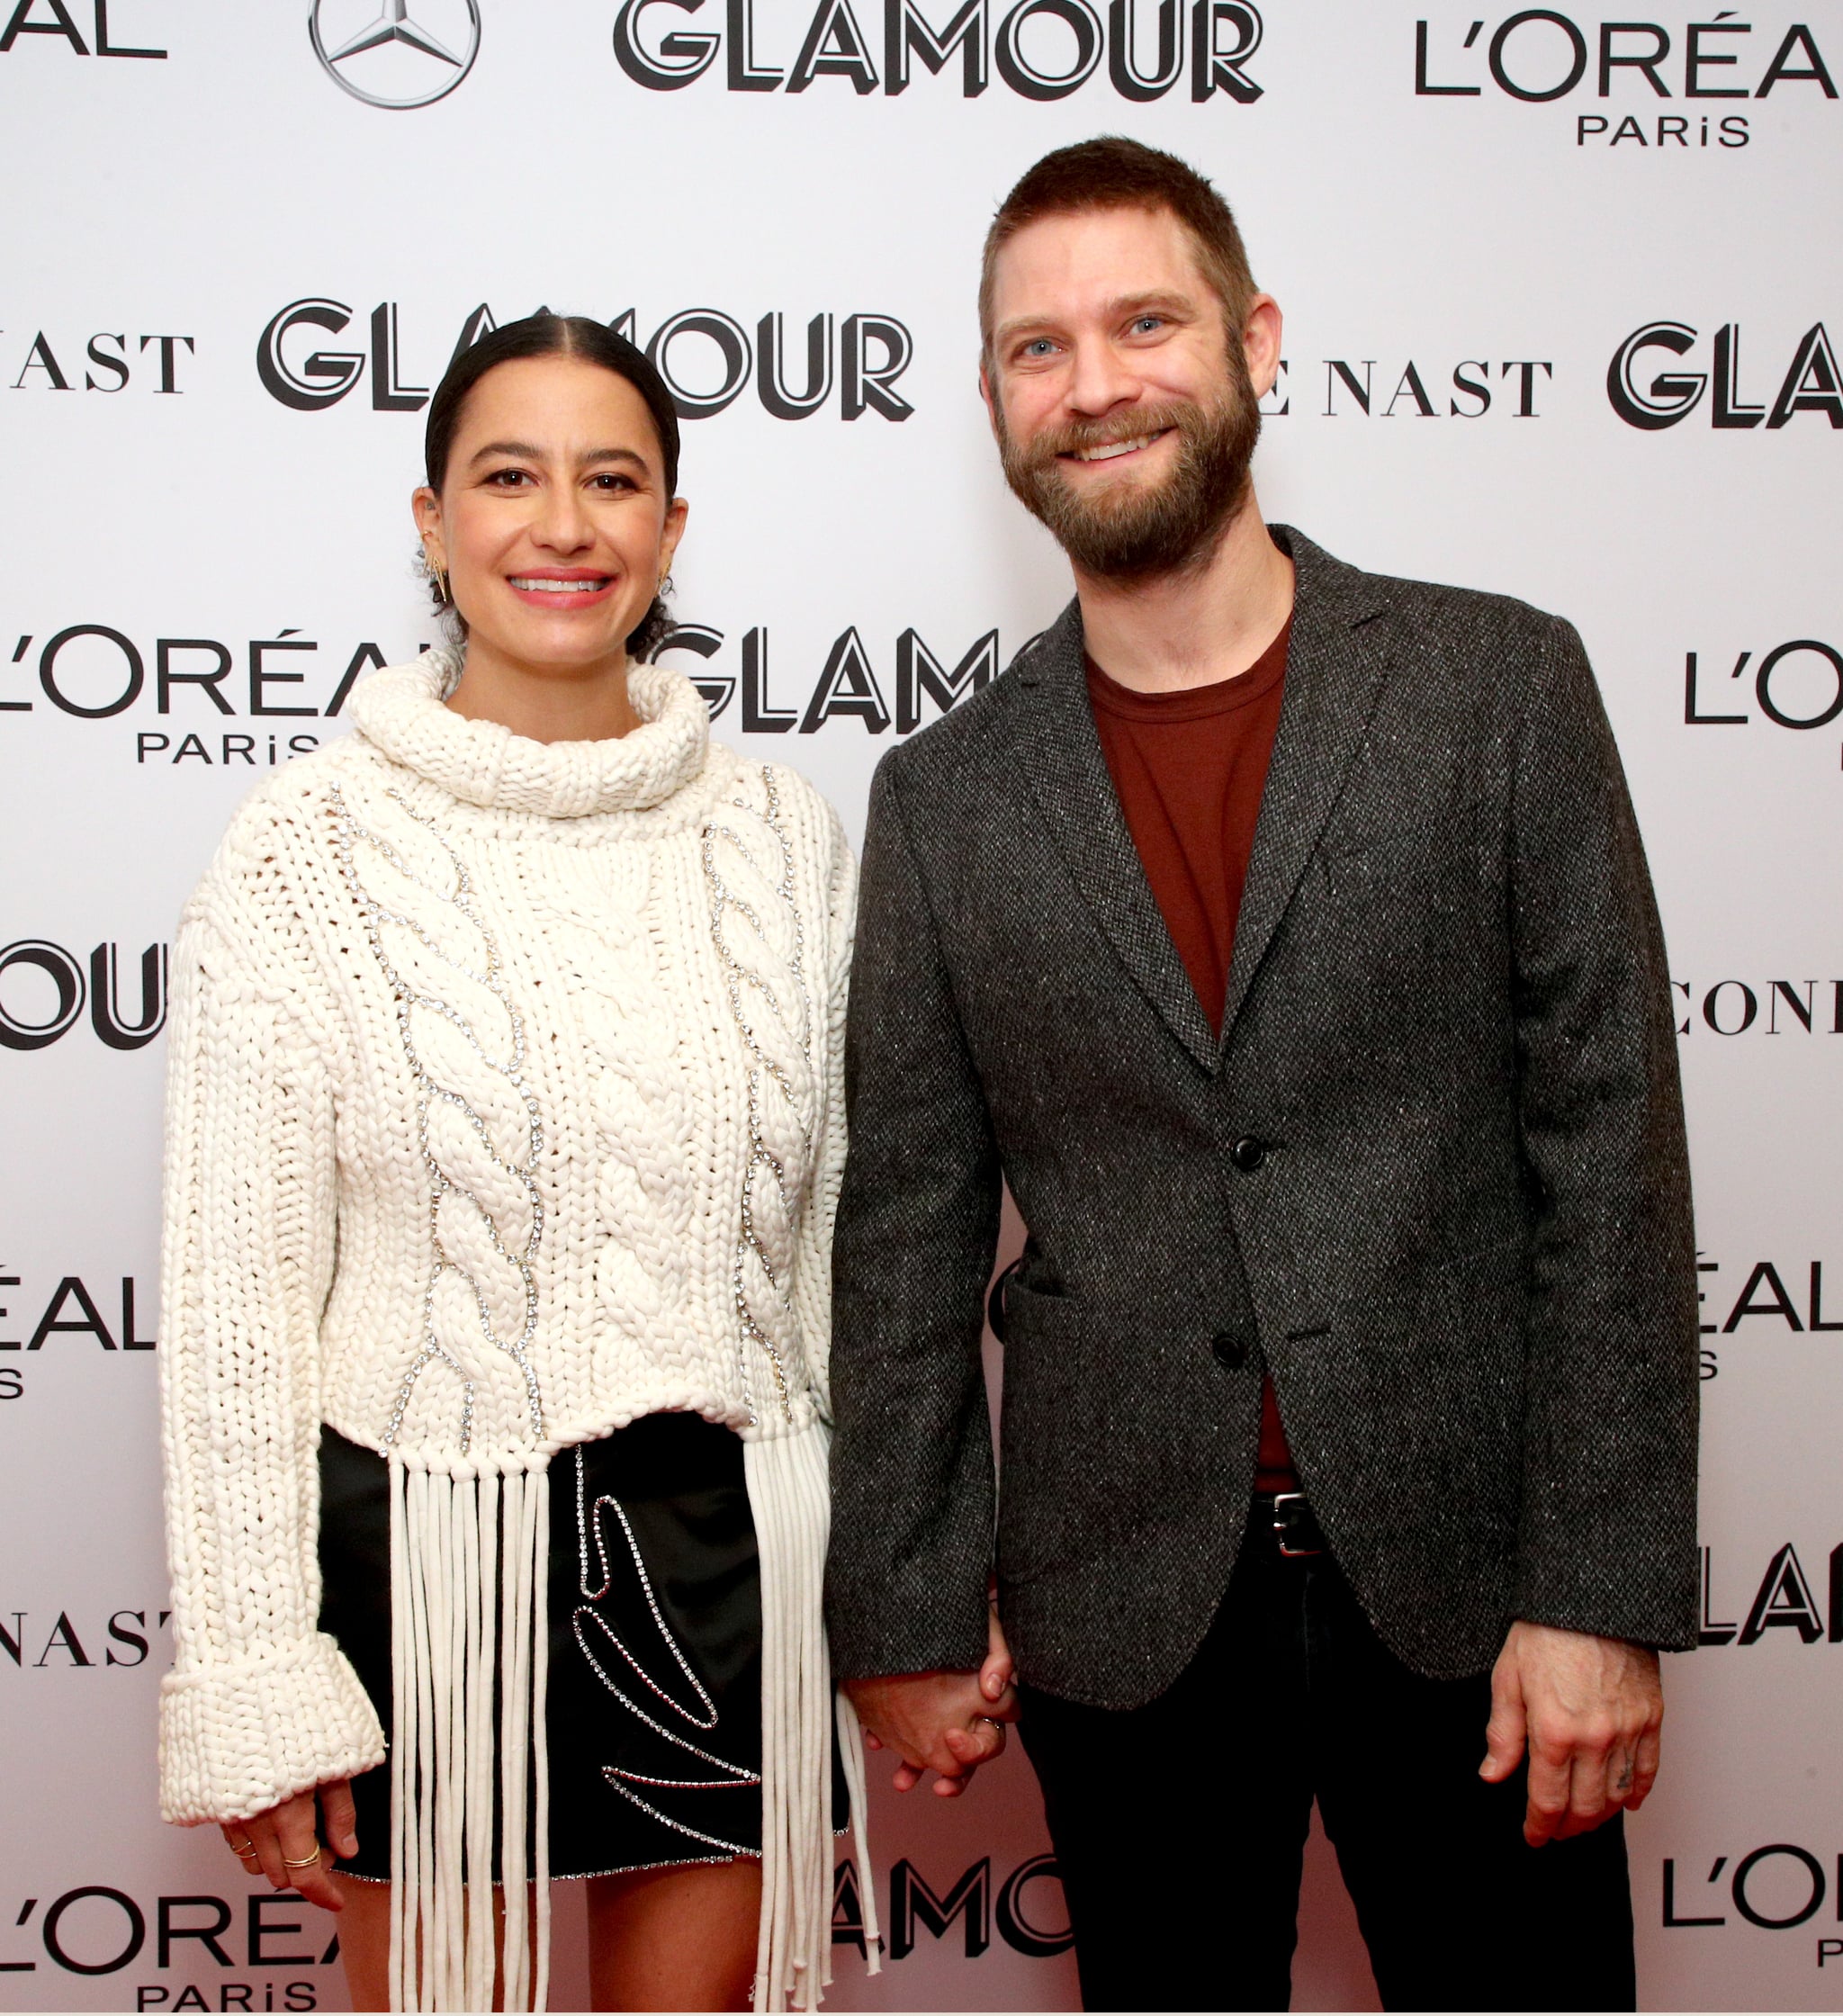 NEW YORK, NEW YORK - NOVEMBER 10: Ilana Glazer and David Rooklin attends the 2019 Glamour Women Of The Year Summit at Alice Tully Hall on November 10, 2019 in New York City. (Photo by Astrid Stawiarz/Getty Images for Glamour)